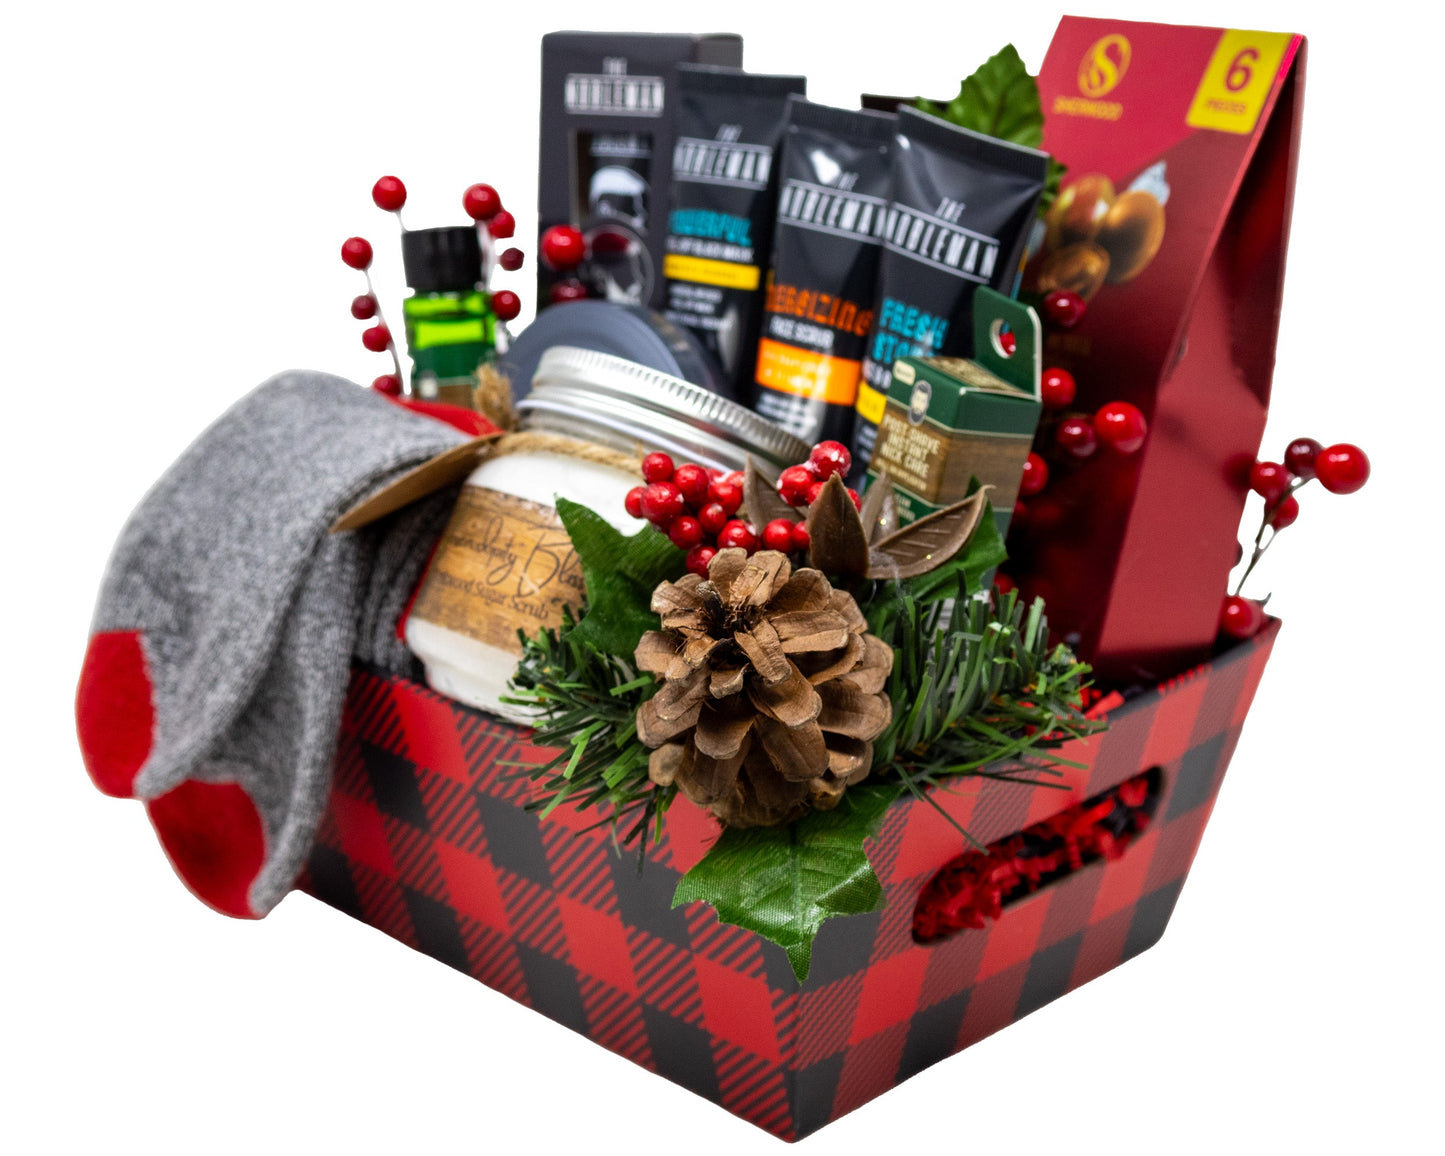 Manly Man Beard and Body Grooming Gift Basket